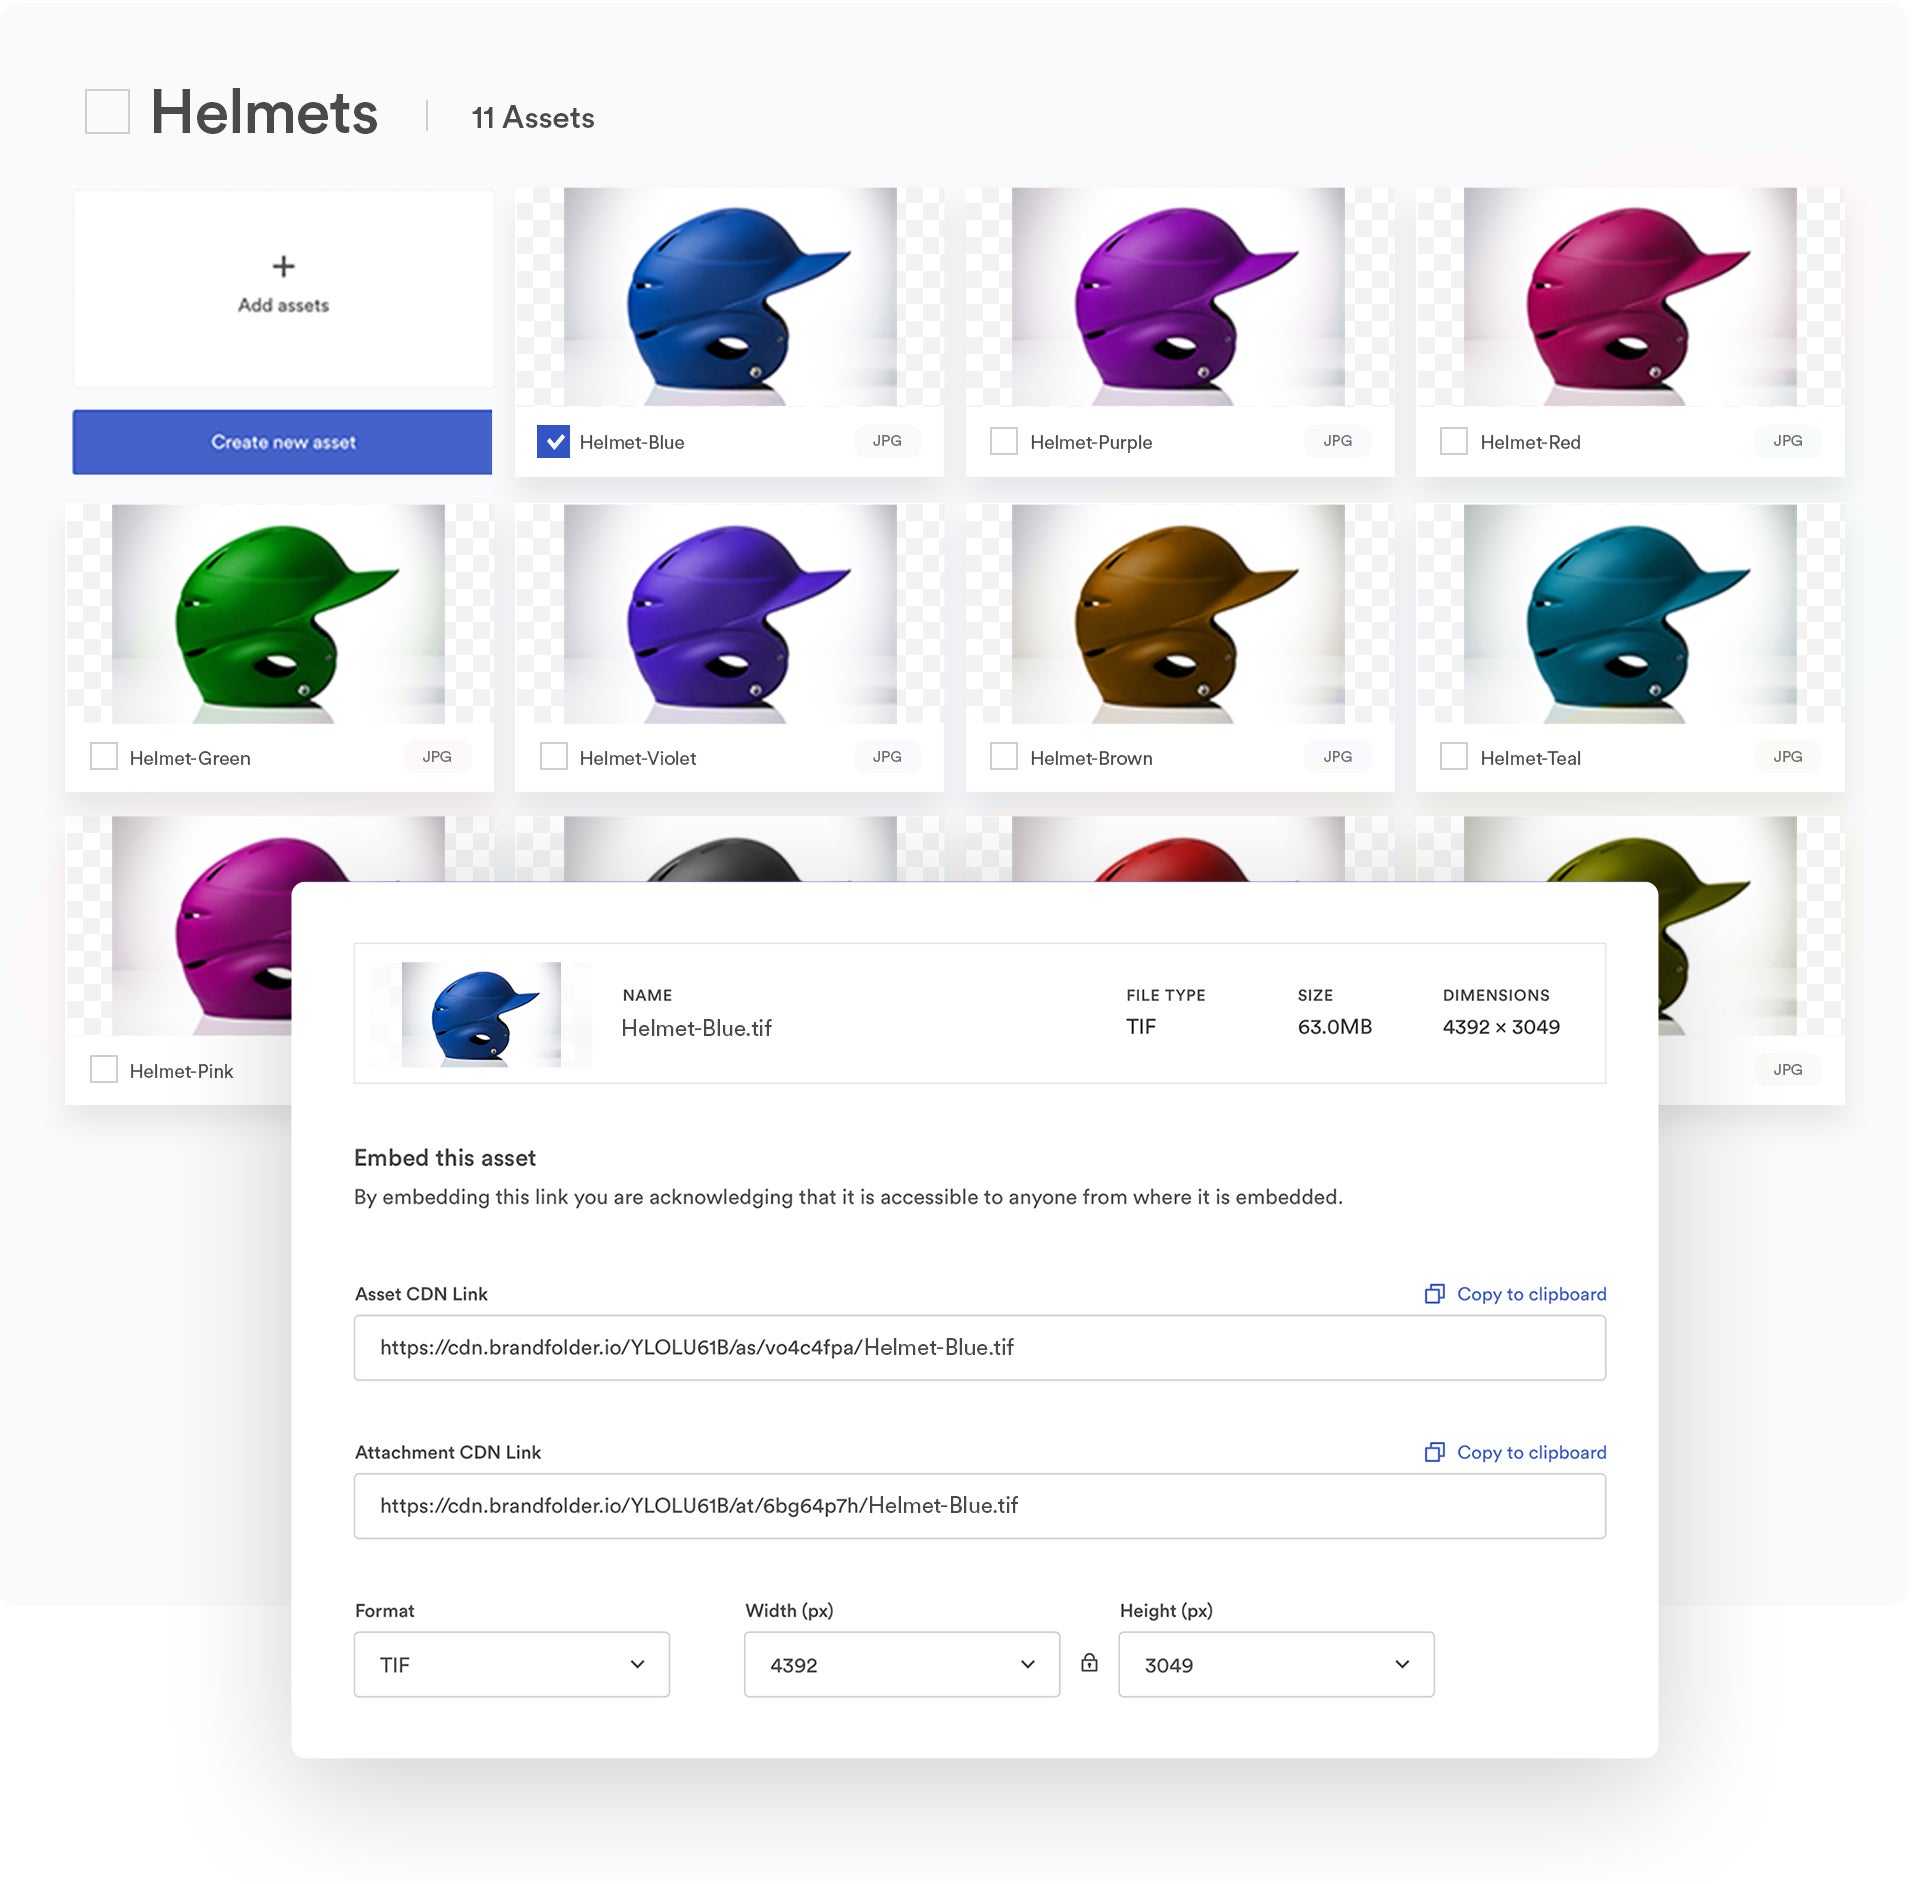 example of a Collection with helmets